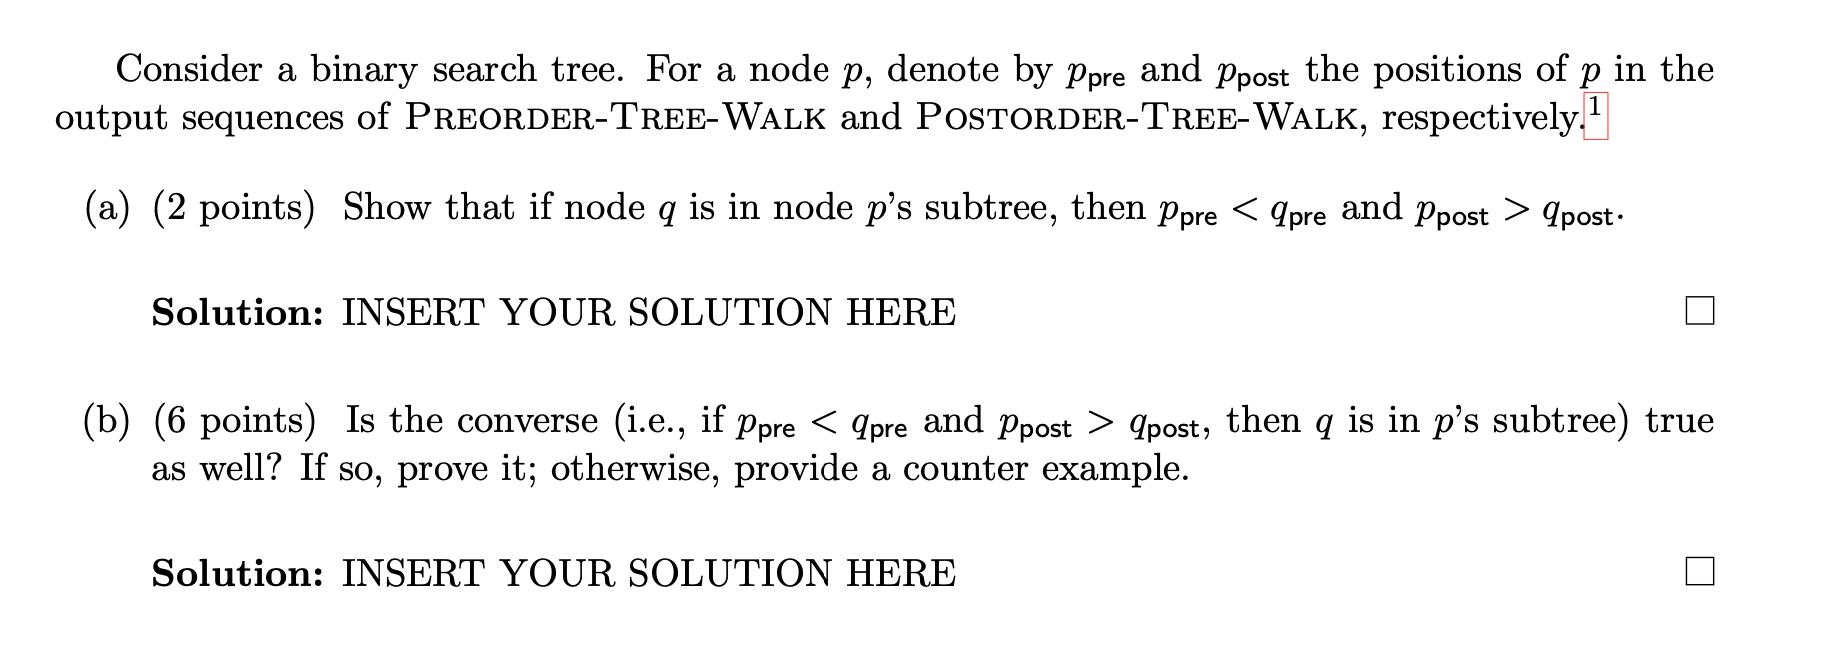 Consider a binary search tree. For a node p, denote by ppre and Ppost the positions of  in the output